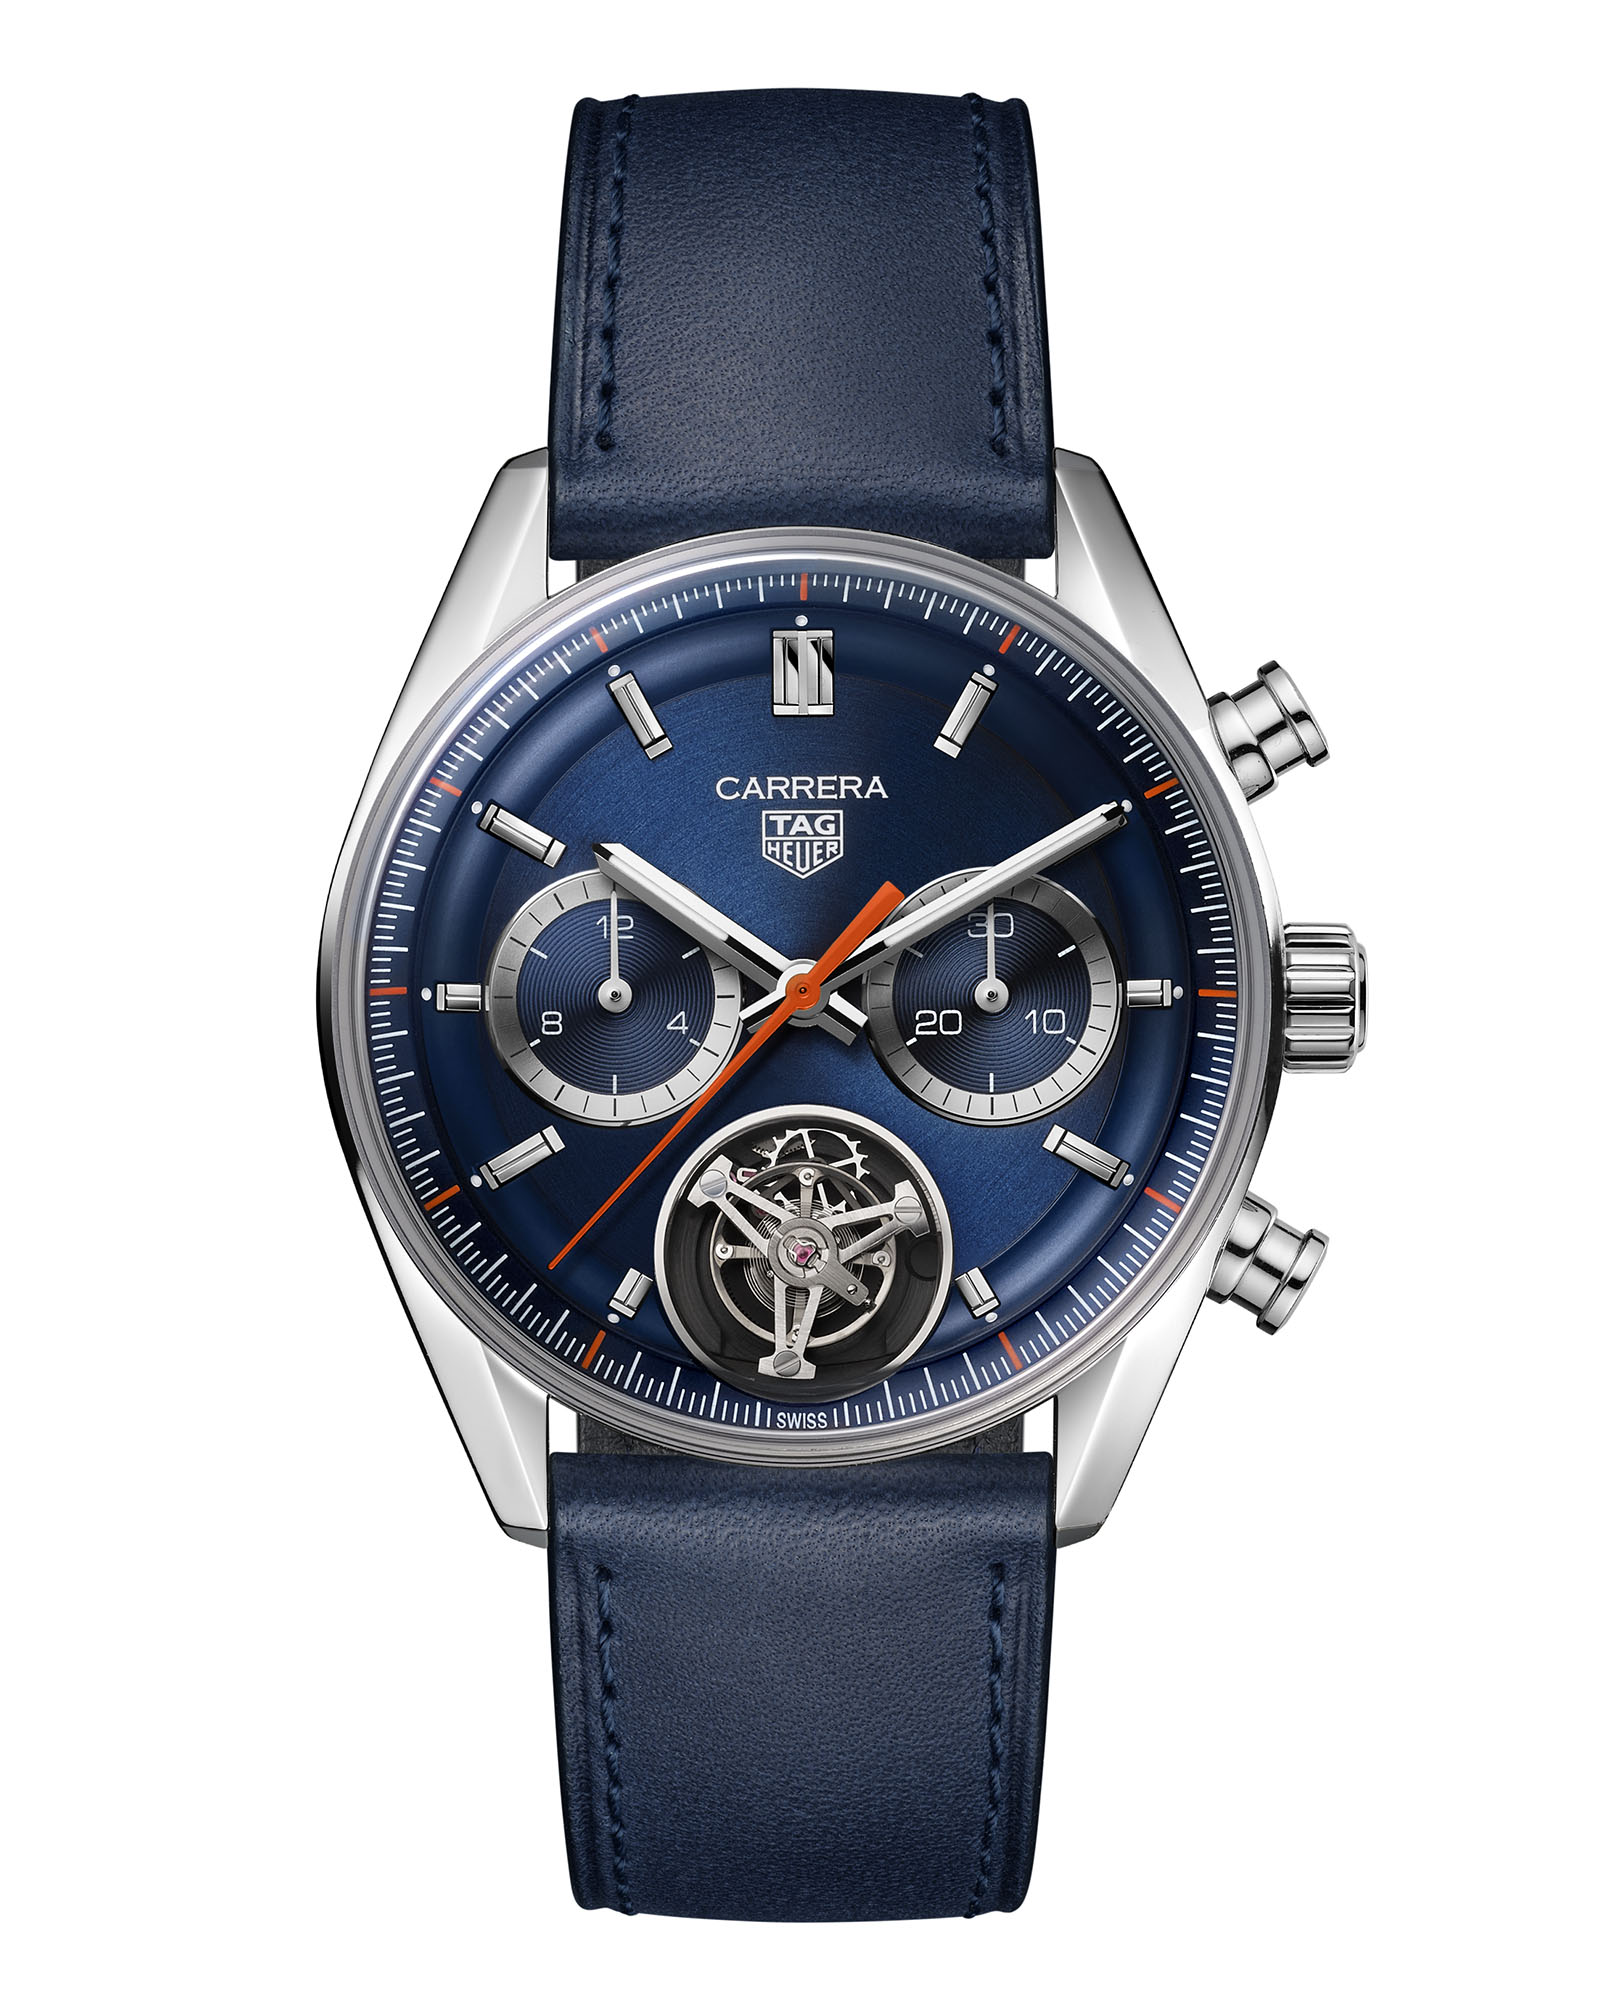 TAG Heuer Introduces Carrera Chronograph And Carrera Chronograph Tourbillon  Watches With New 'Glassbox' Case Design